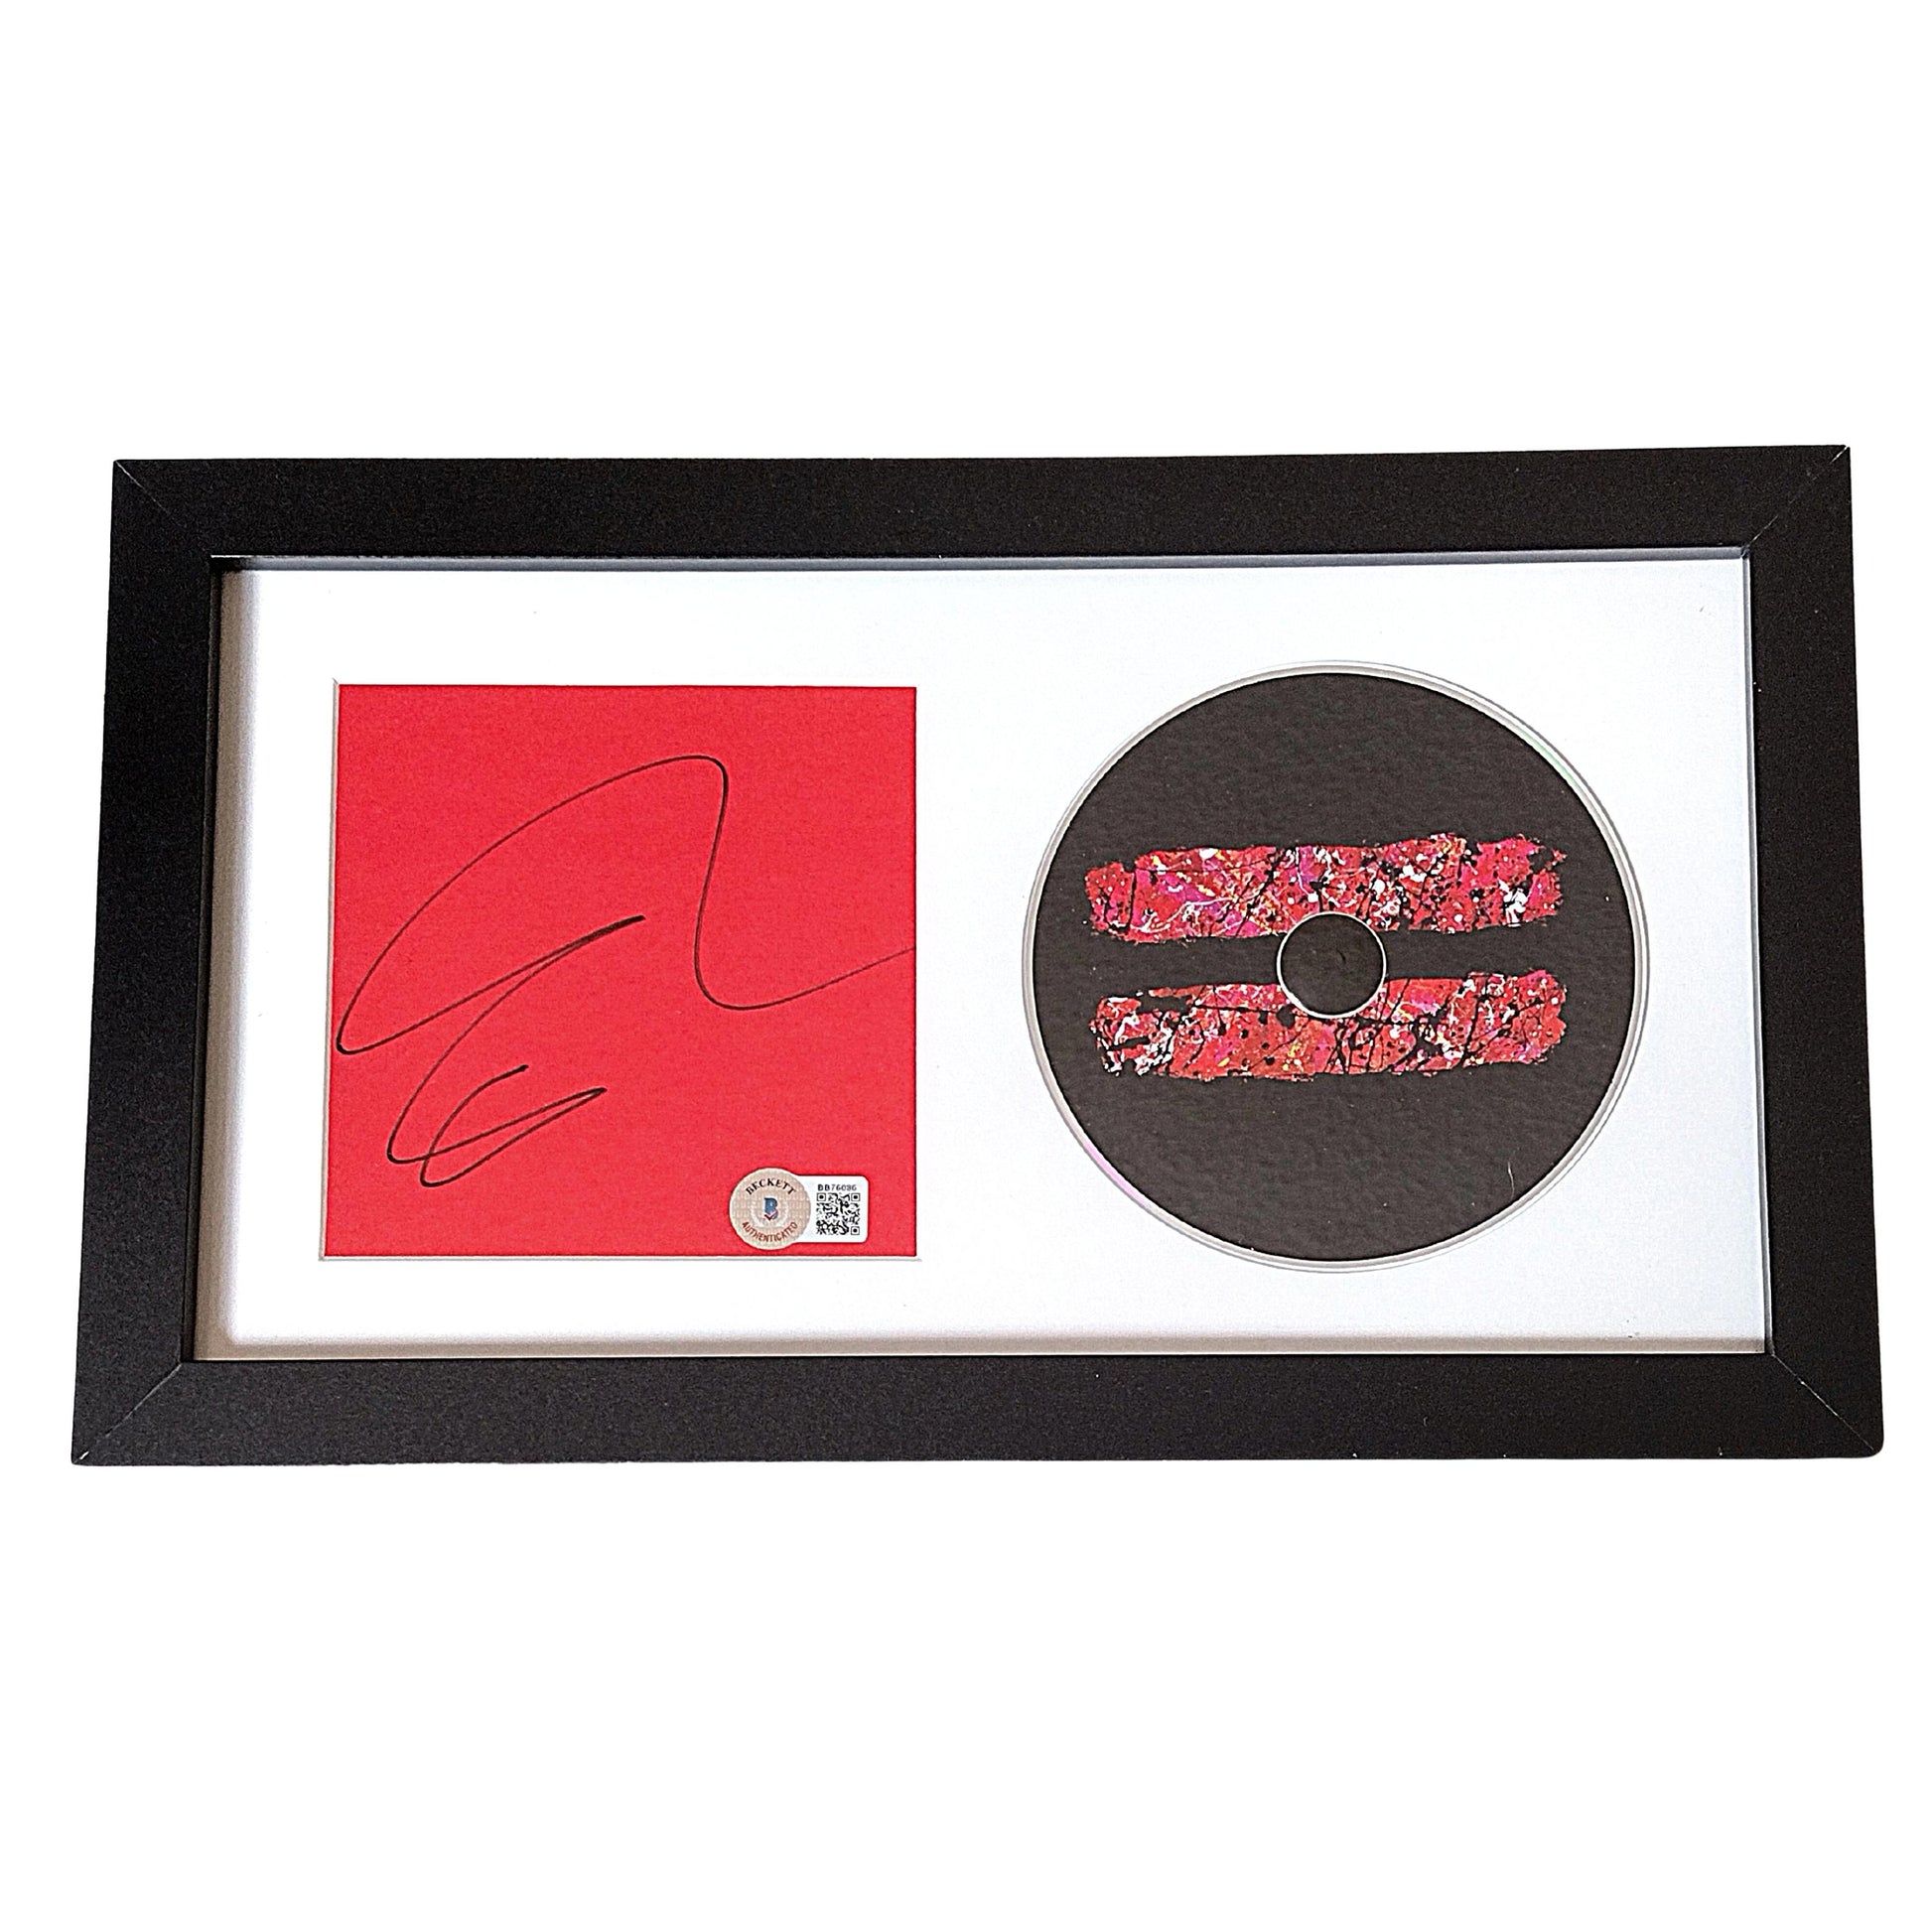 Music- Autographed- Ed Sheeran Signed Equals CD Cover Framed Matted Display Beckett BAS Authentication 302